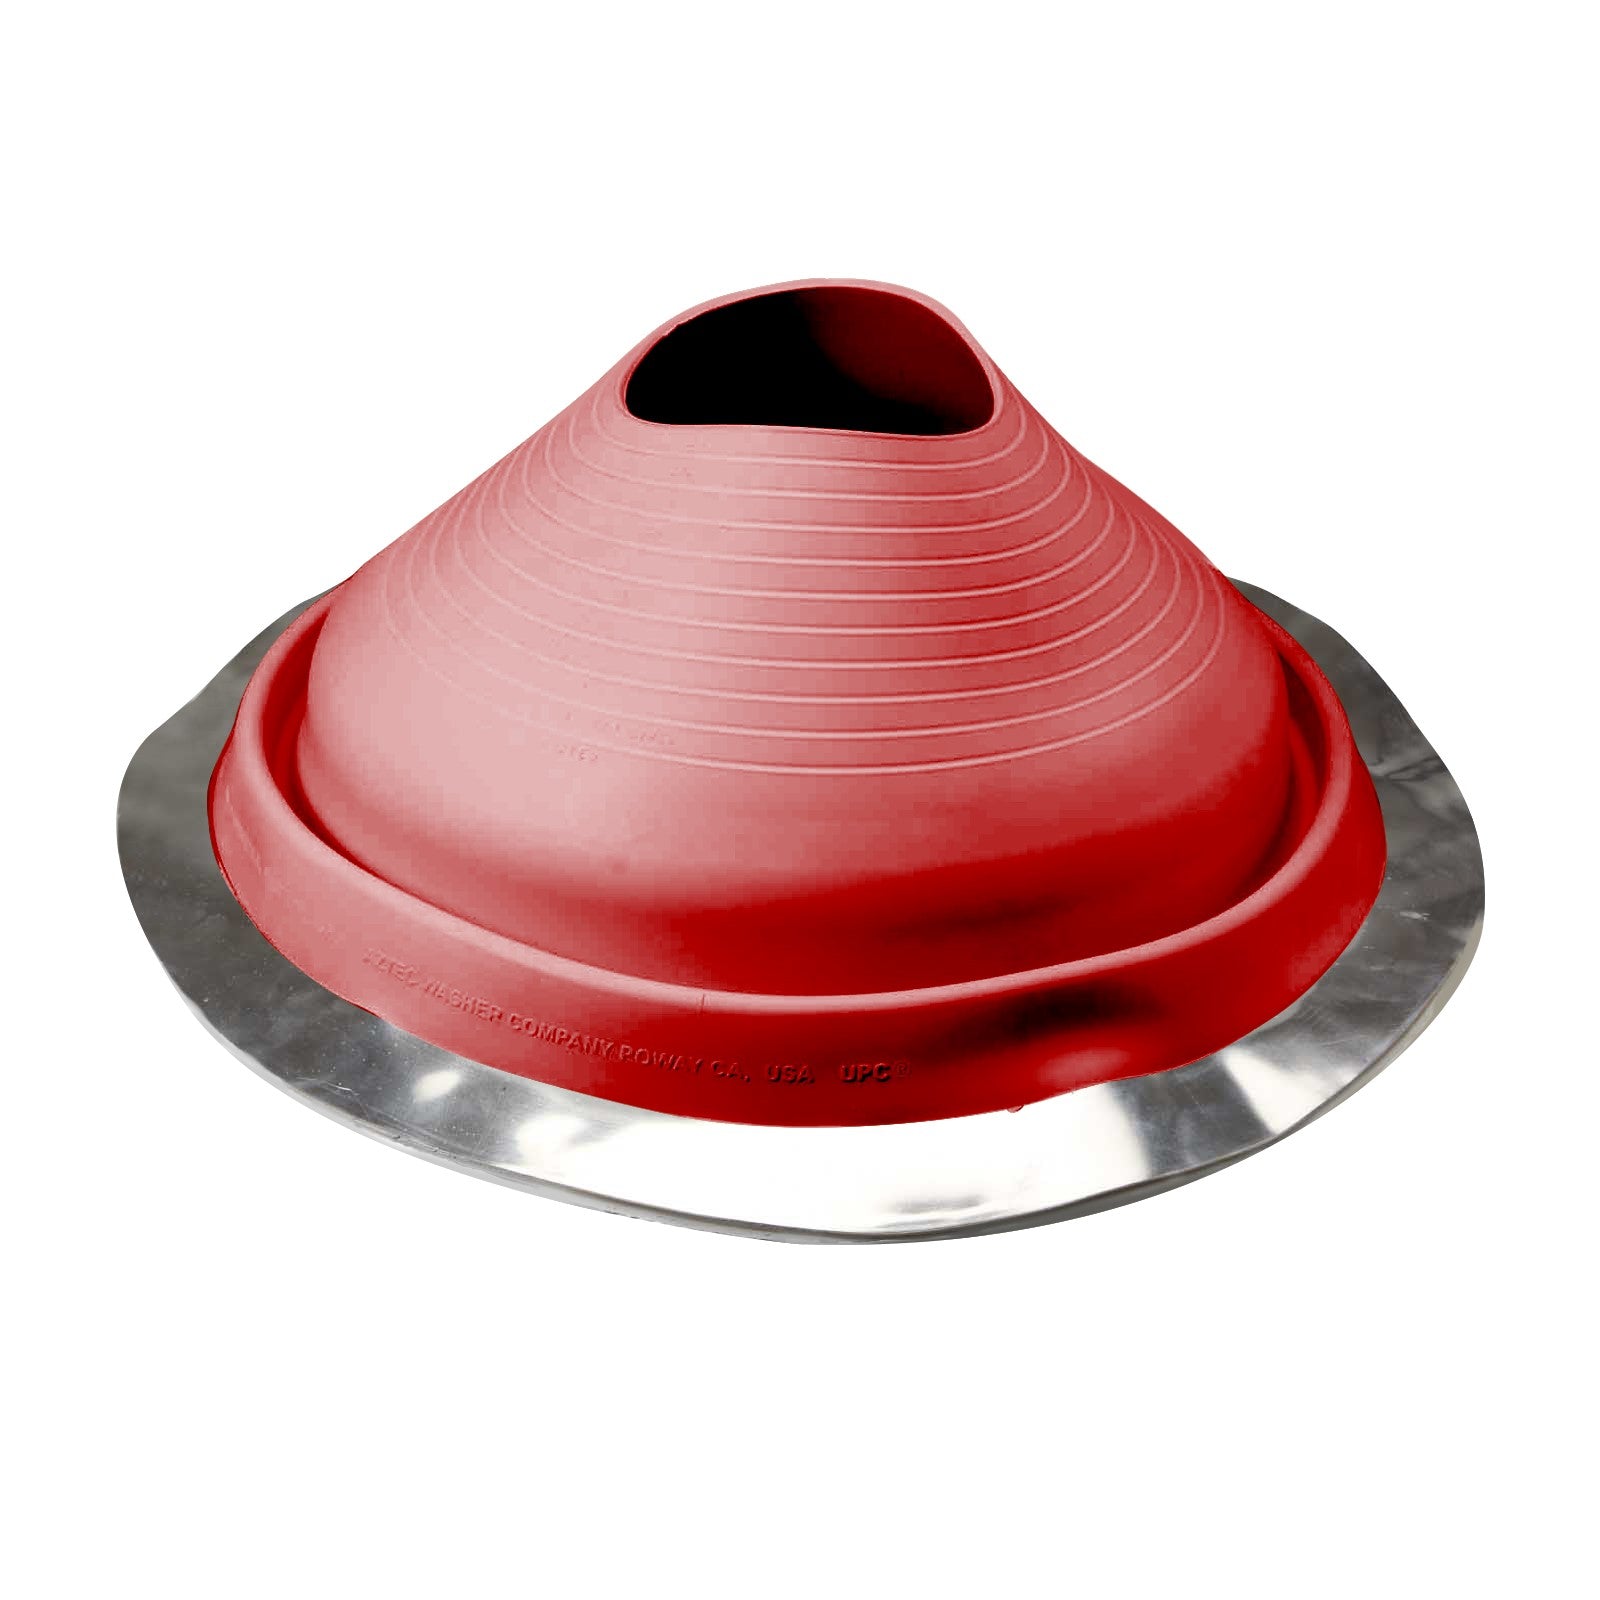 #9 Roofjack Round EPDM Pipe Flashing Boot Bright Red